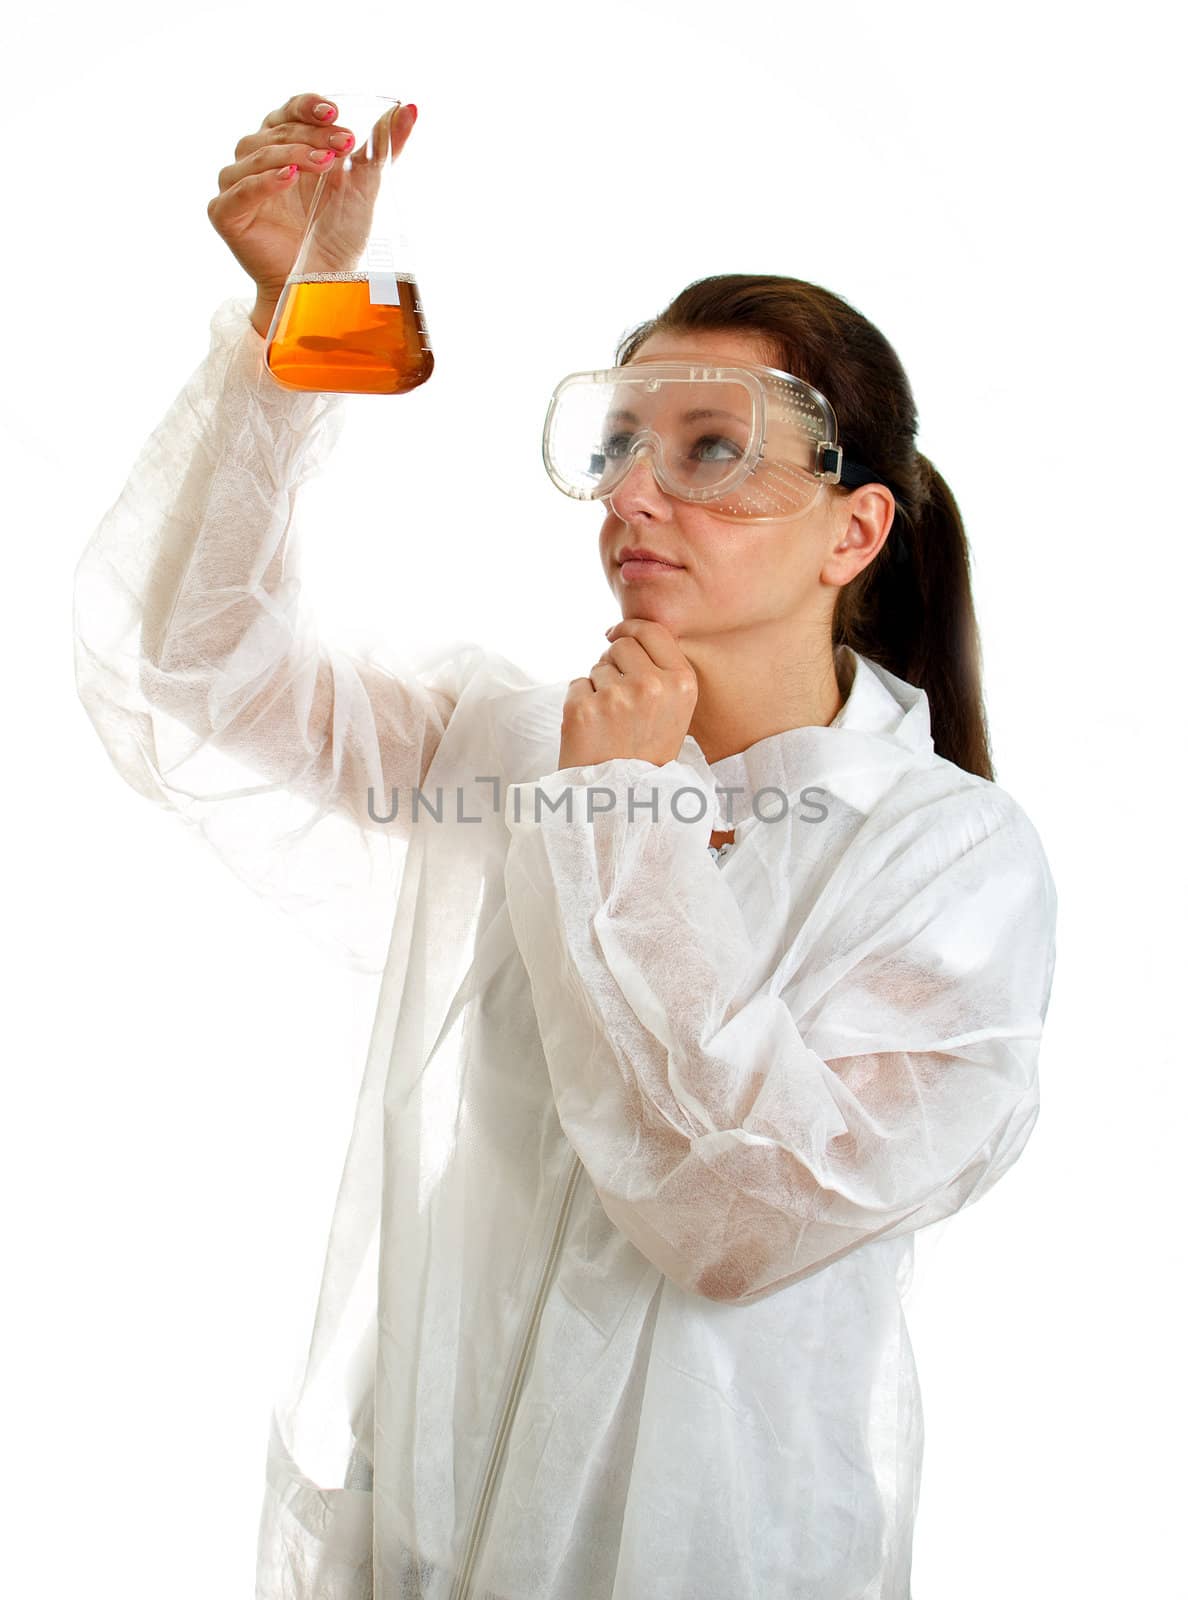 Female scientist in lab coat with chemical glassware. Isolated on white.